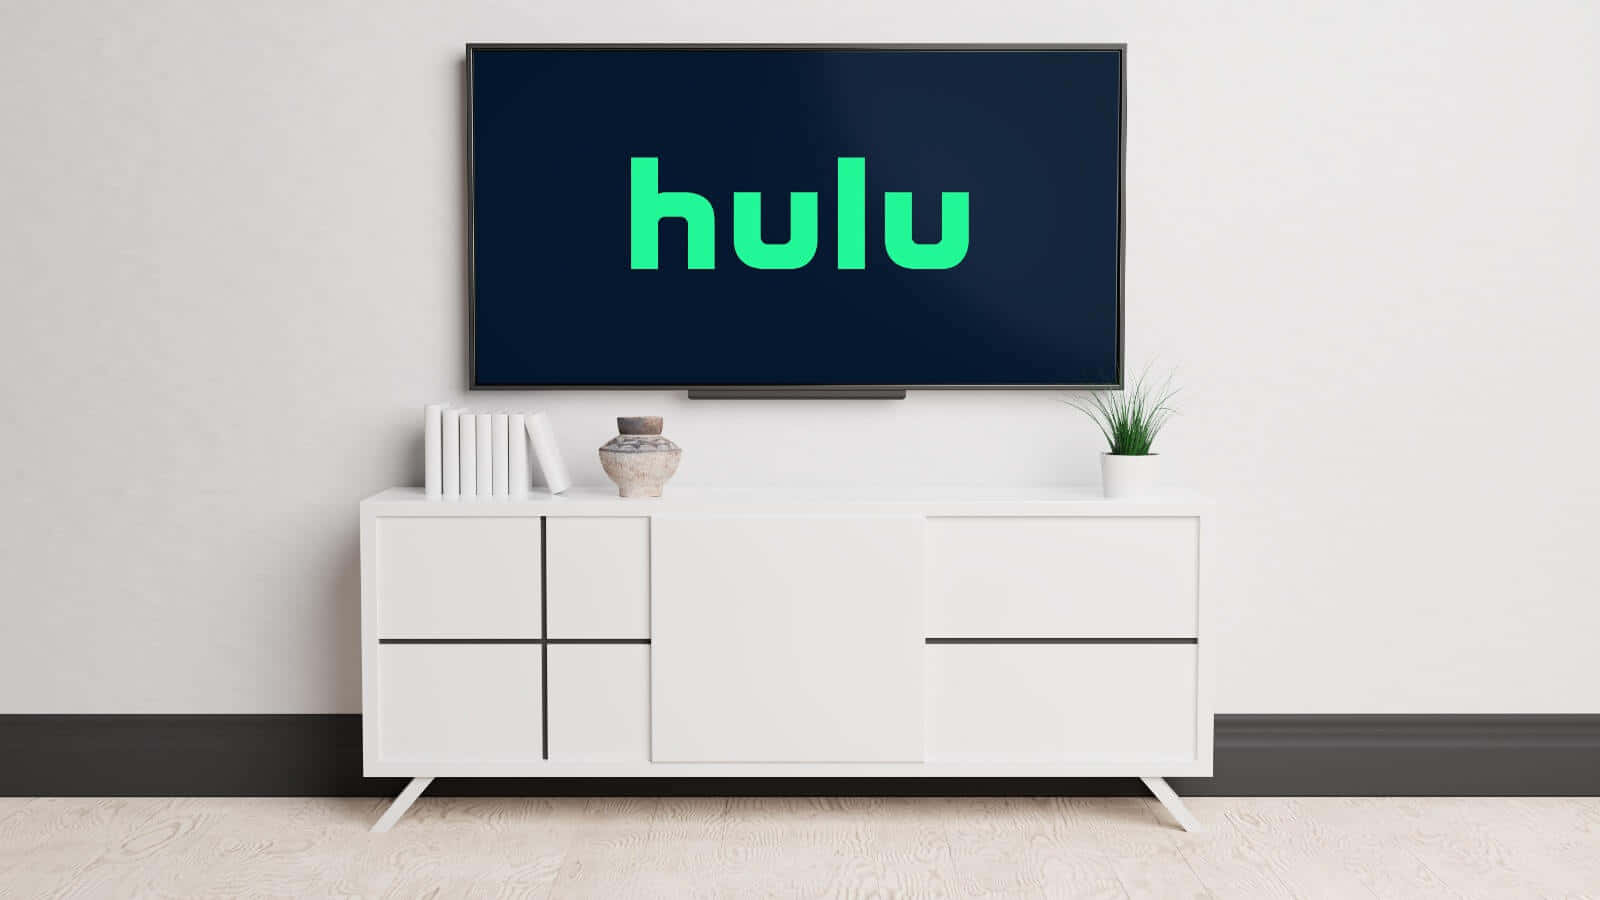 Enjoy every episode of your favorite show with Hulu